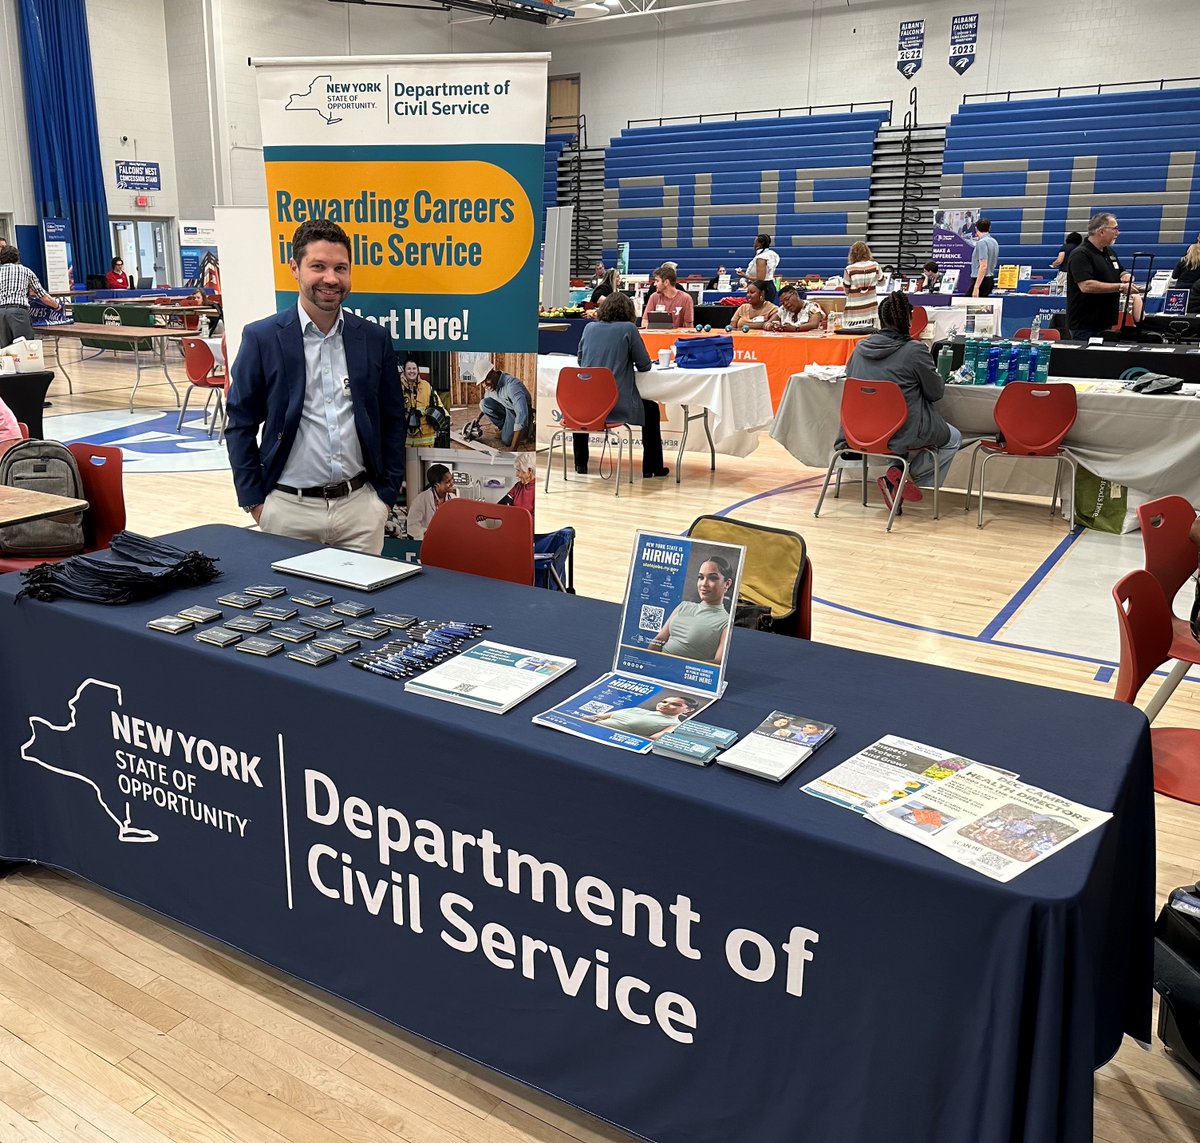 Meet #TeamCivilService at the Albany High School Career Fair! Students and visitors are invited to stop by and learn about rewarding careers in public service from 3:30 to 5 pm today! @albanyschools